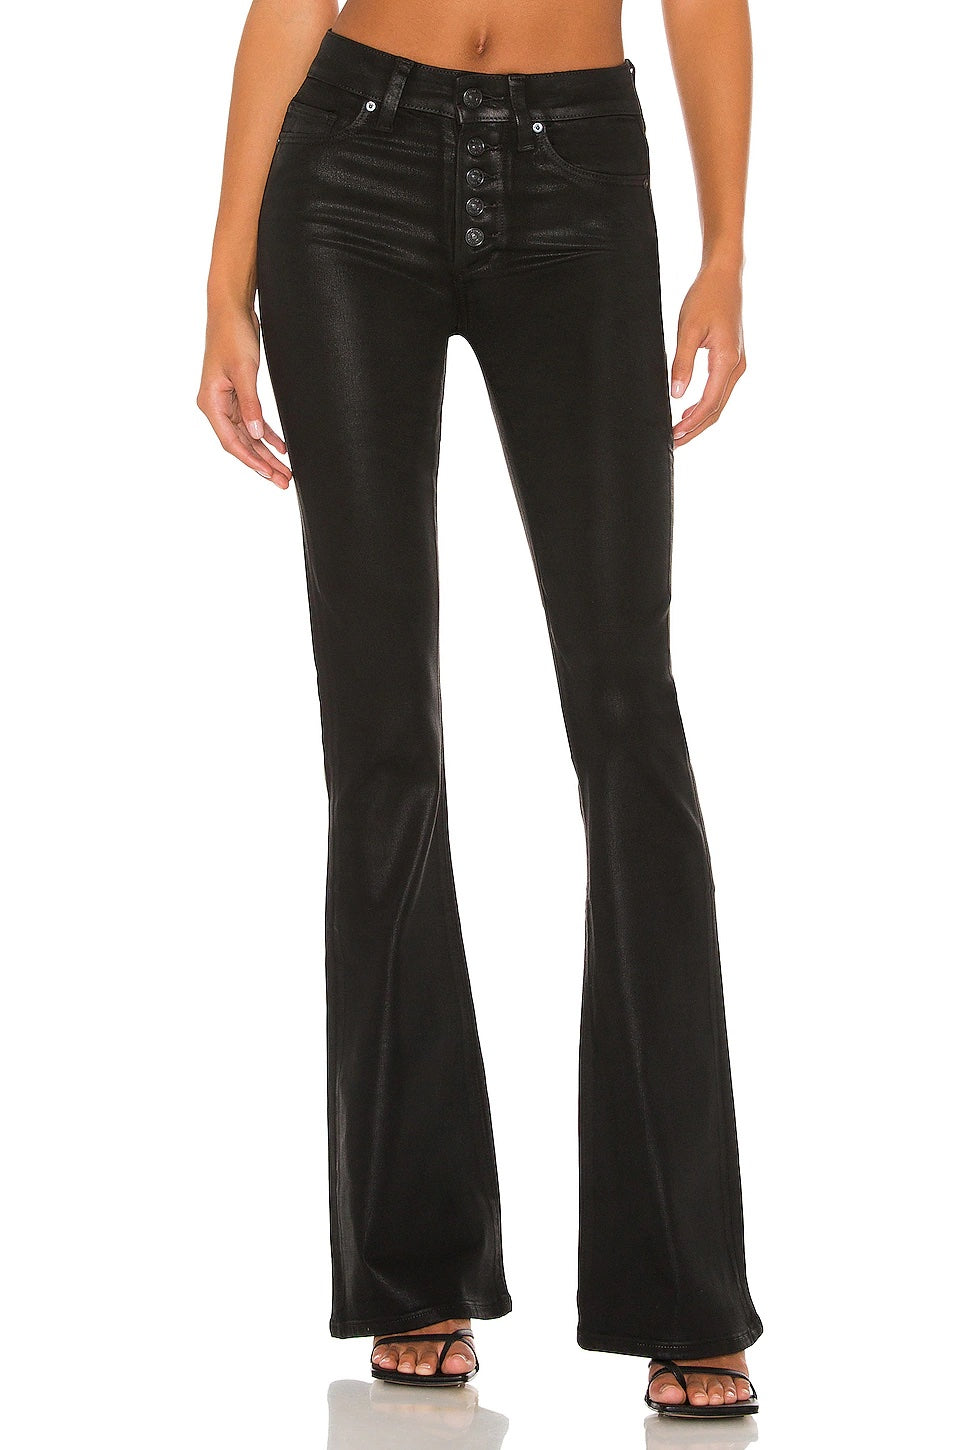 Luxe black pants from Paige 